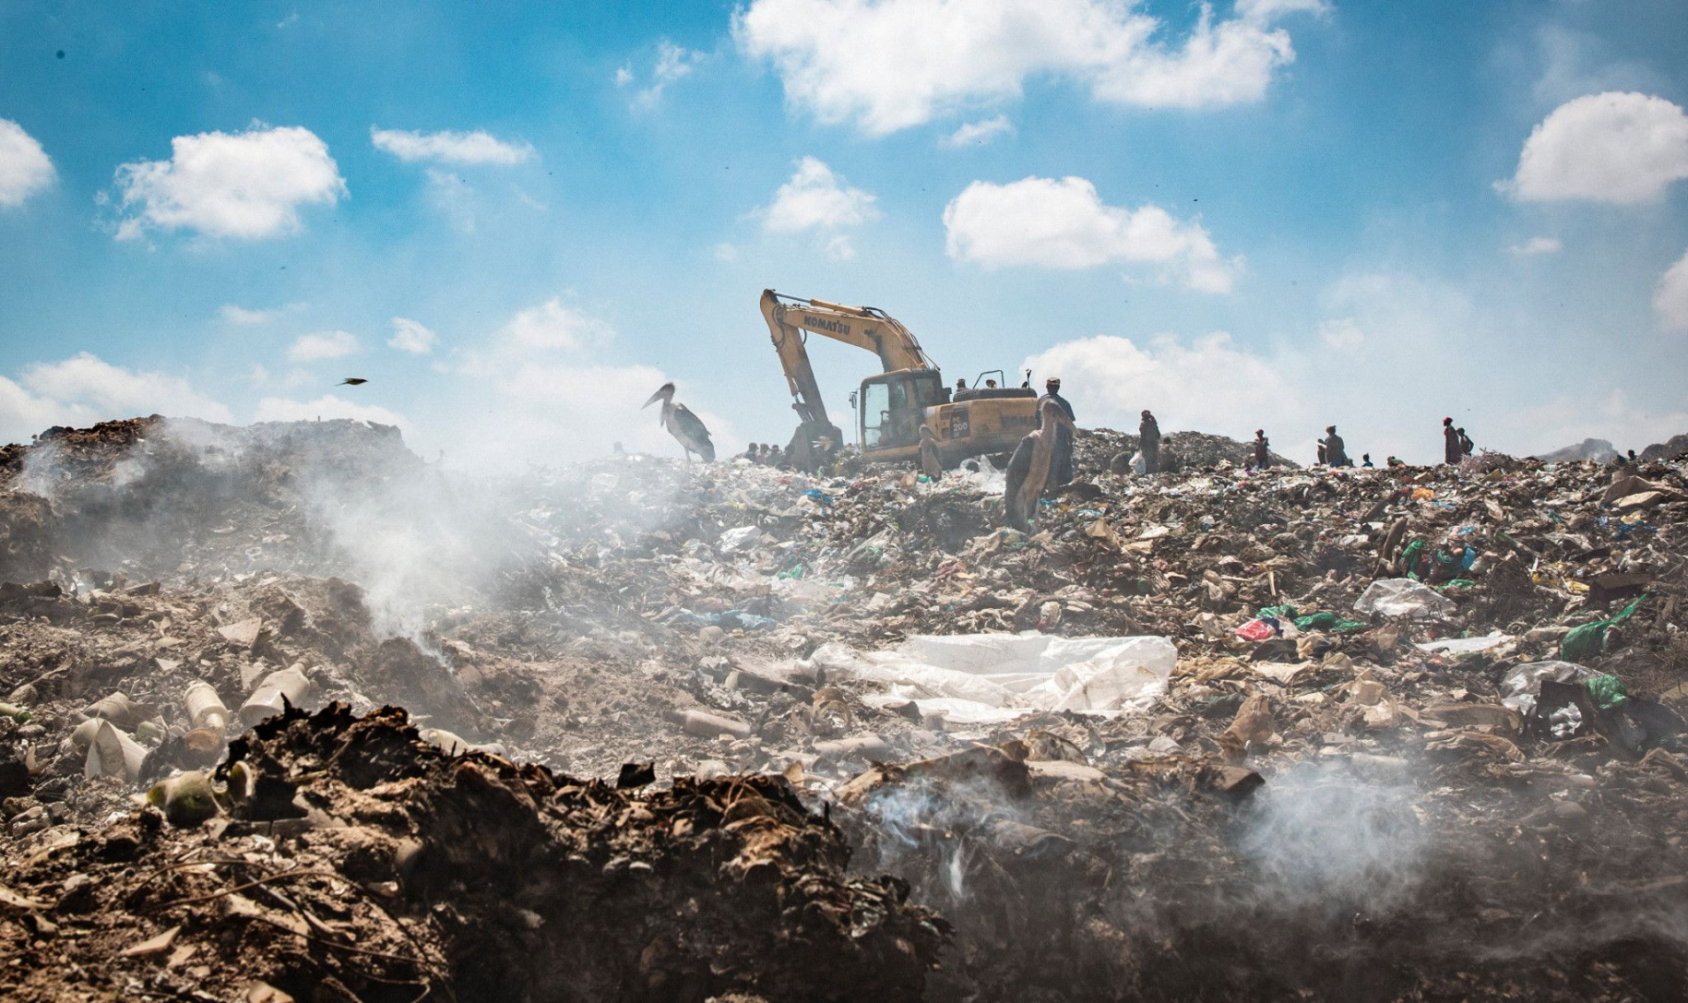 A landfill site with trash all around and small smoking fires. A construction vehicle is on a pile and a bird perches on the trash.